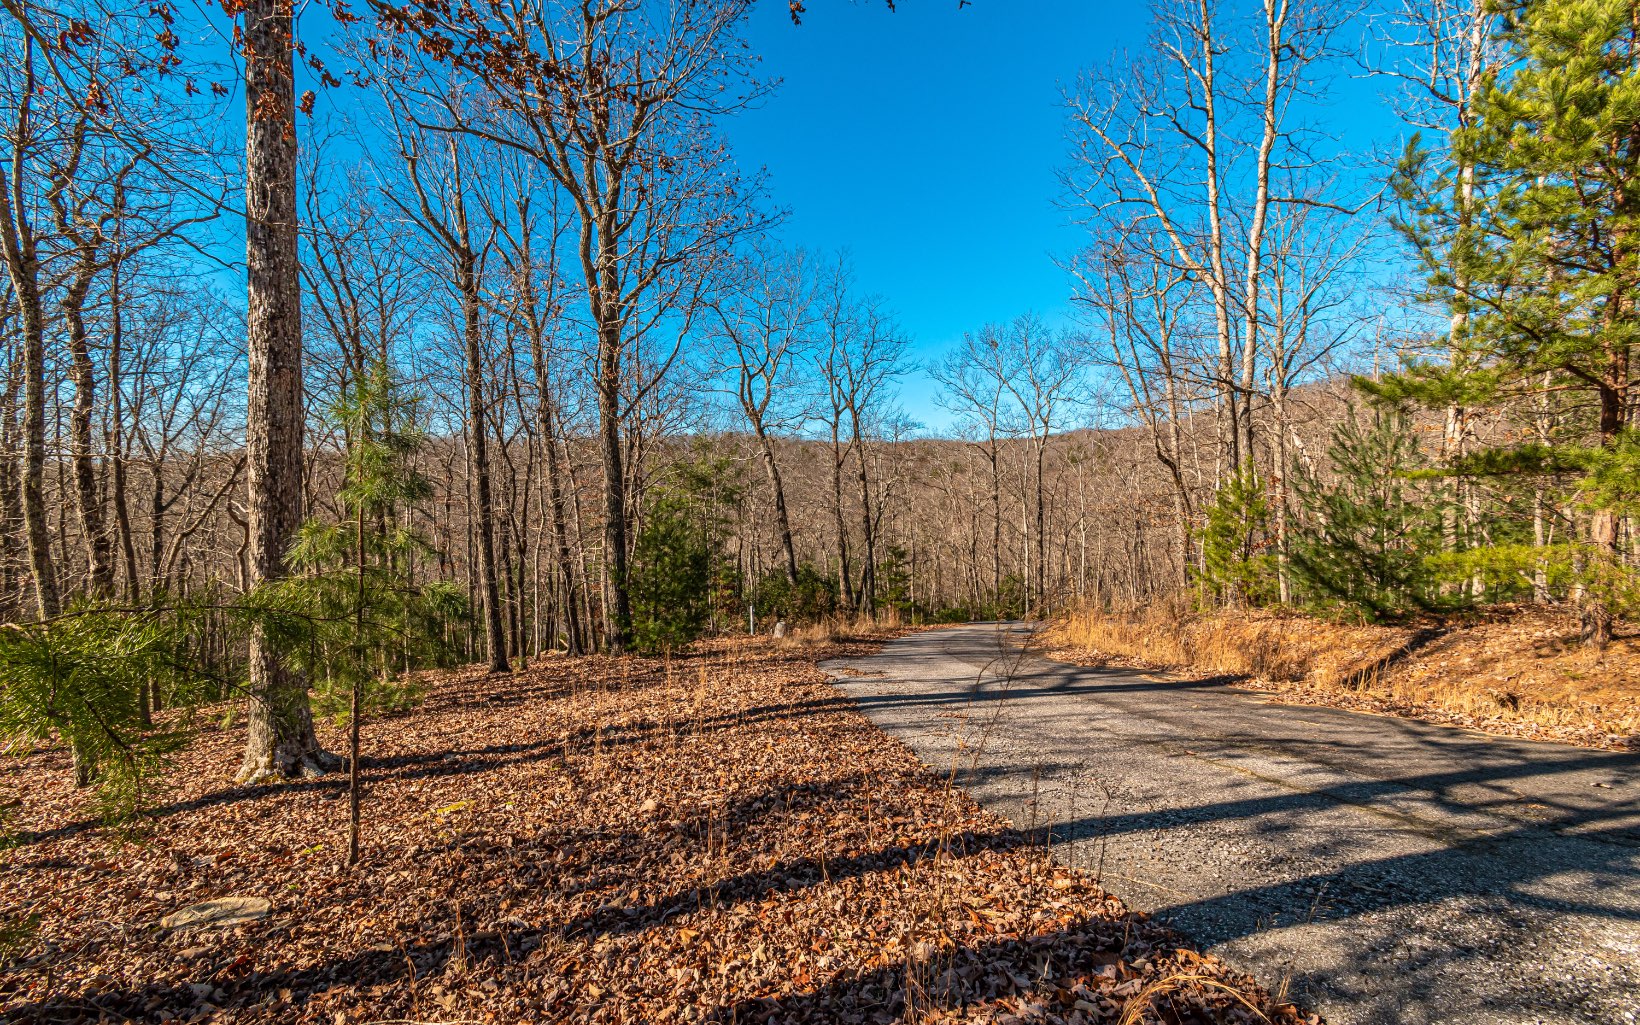 Beautiful gentle wooded 1.82AC lot with seasonal mountain views and all-paved access in the quiet community of Hunters Ridge, located between Blue Ridge and Blairsville GA, just minutes from Downtown Blue Ridge, Lake Blue Ridge, the Toccoa River, shopping, restaurants, hiking trails & more! Get out and hike this gently sloping lot with potentially multiple building sites to choose from, and build the mountain home of your dreams where you can peacefully watch deer and turkey in your own backyard!